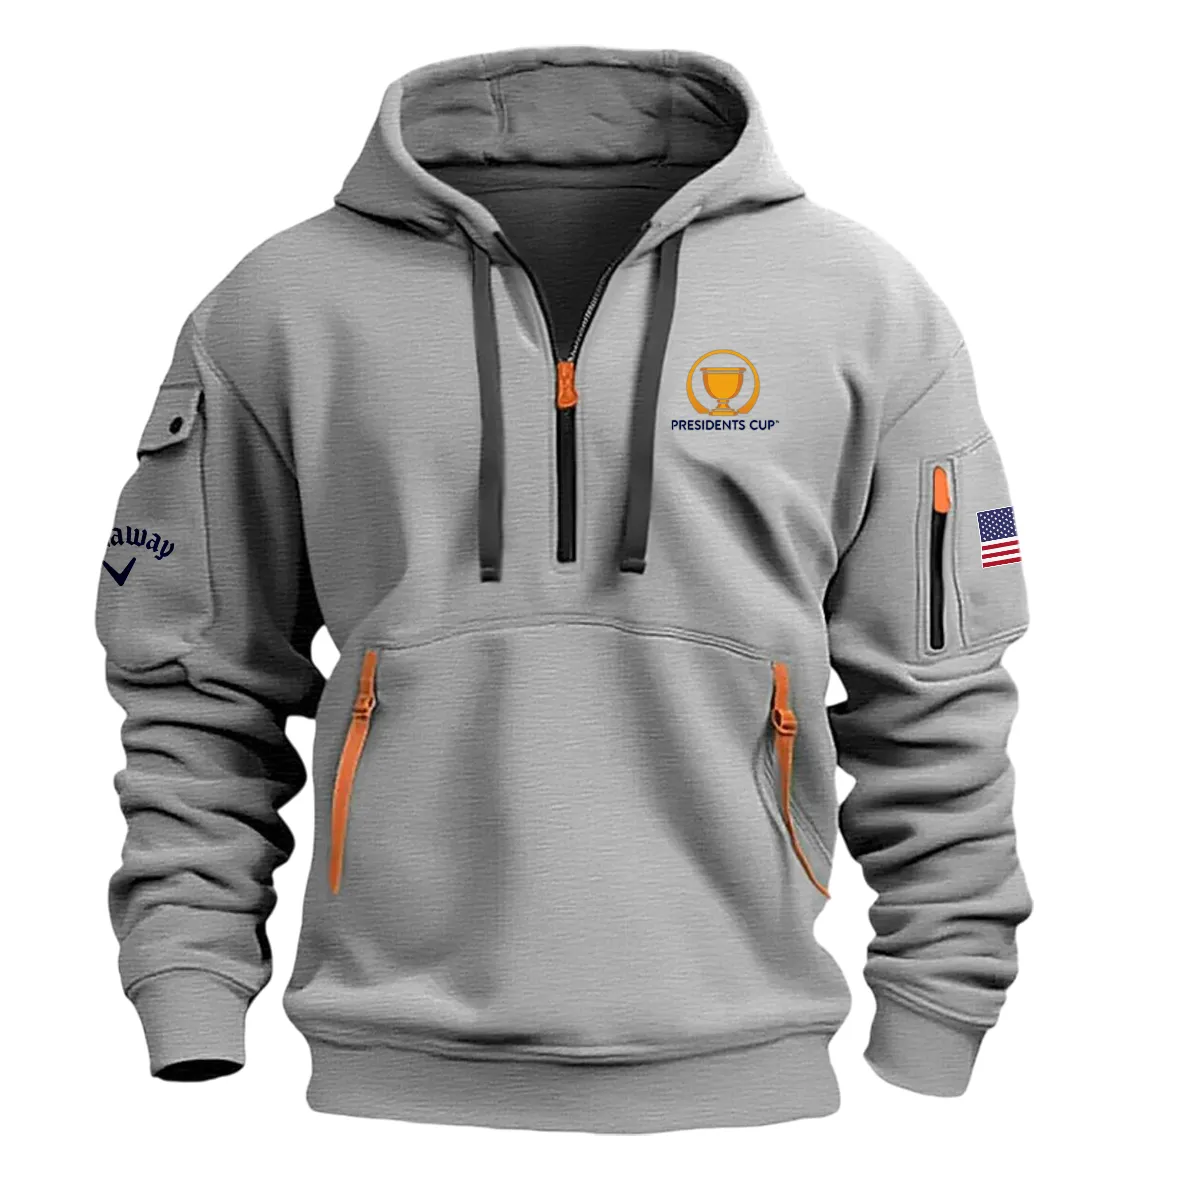 Gray Color Callaway Fashion Hoodie Half Zipper Presidents Cup Gift For Fans